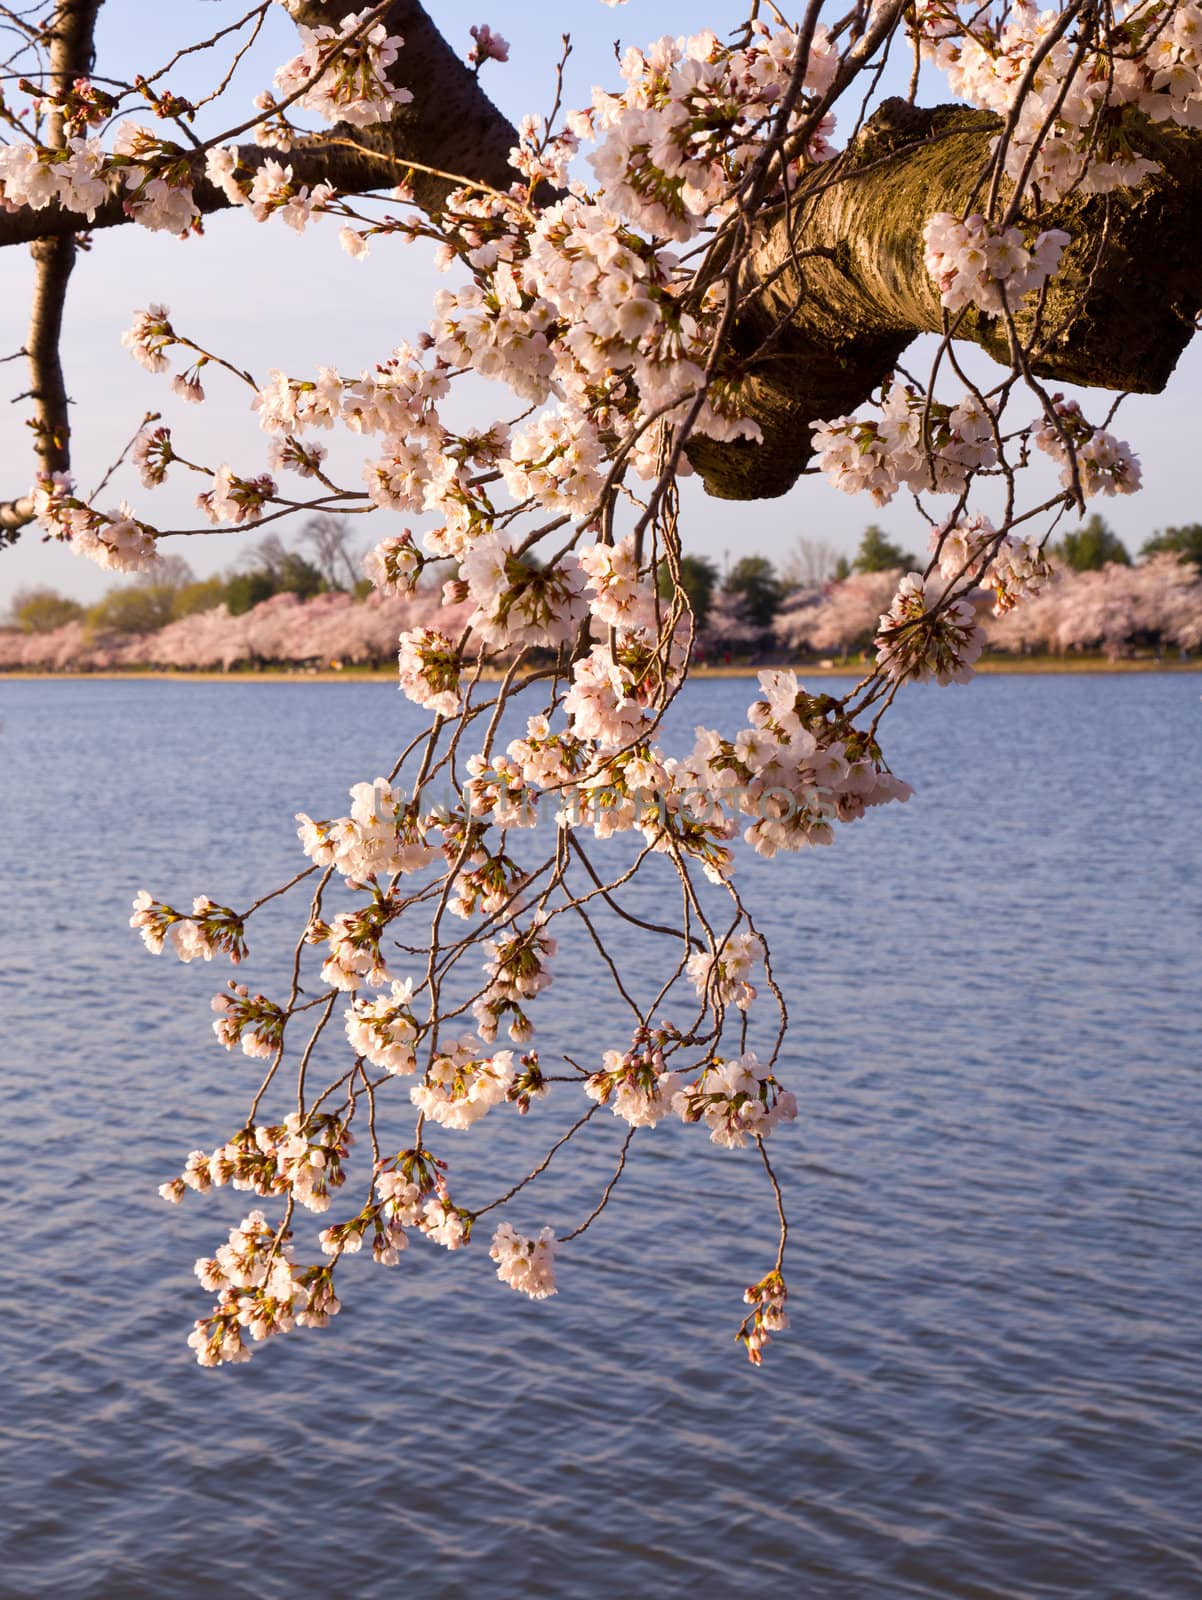 Old gnarled tree by Tidal Basin and surrounded by pink Japanese Cherry blossoms